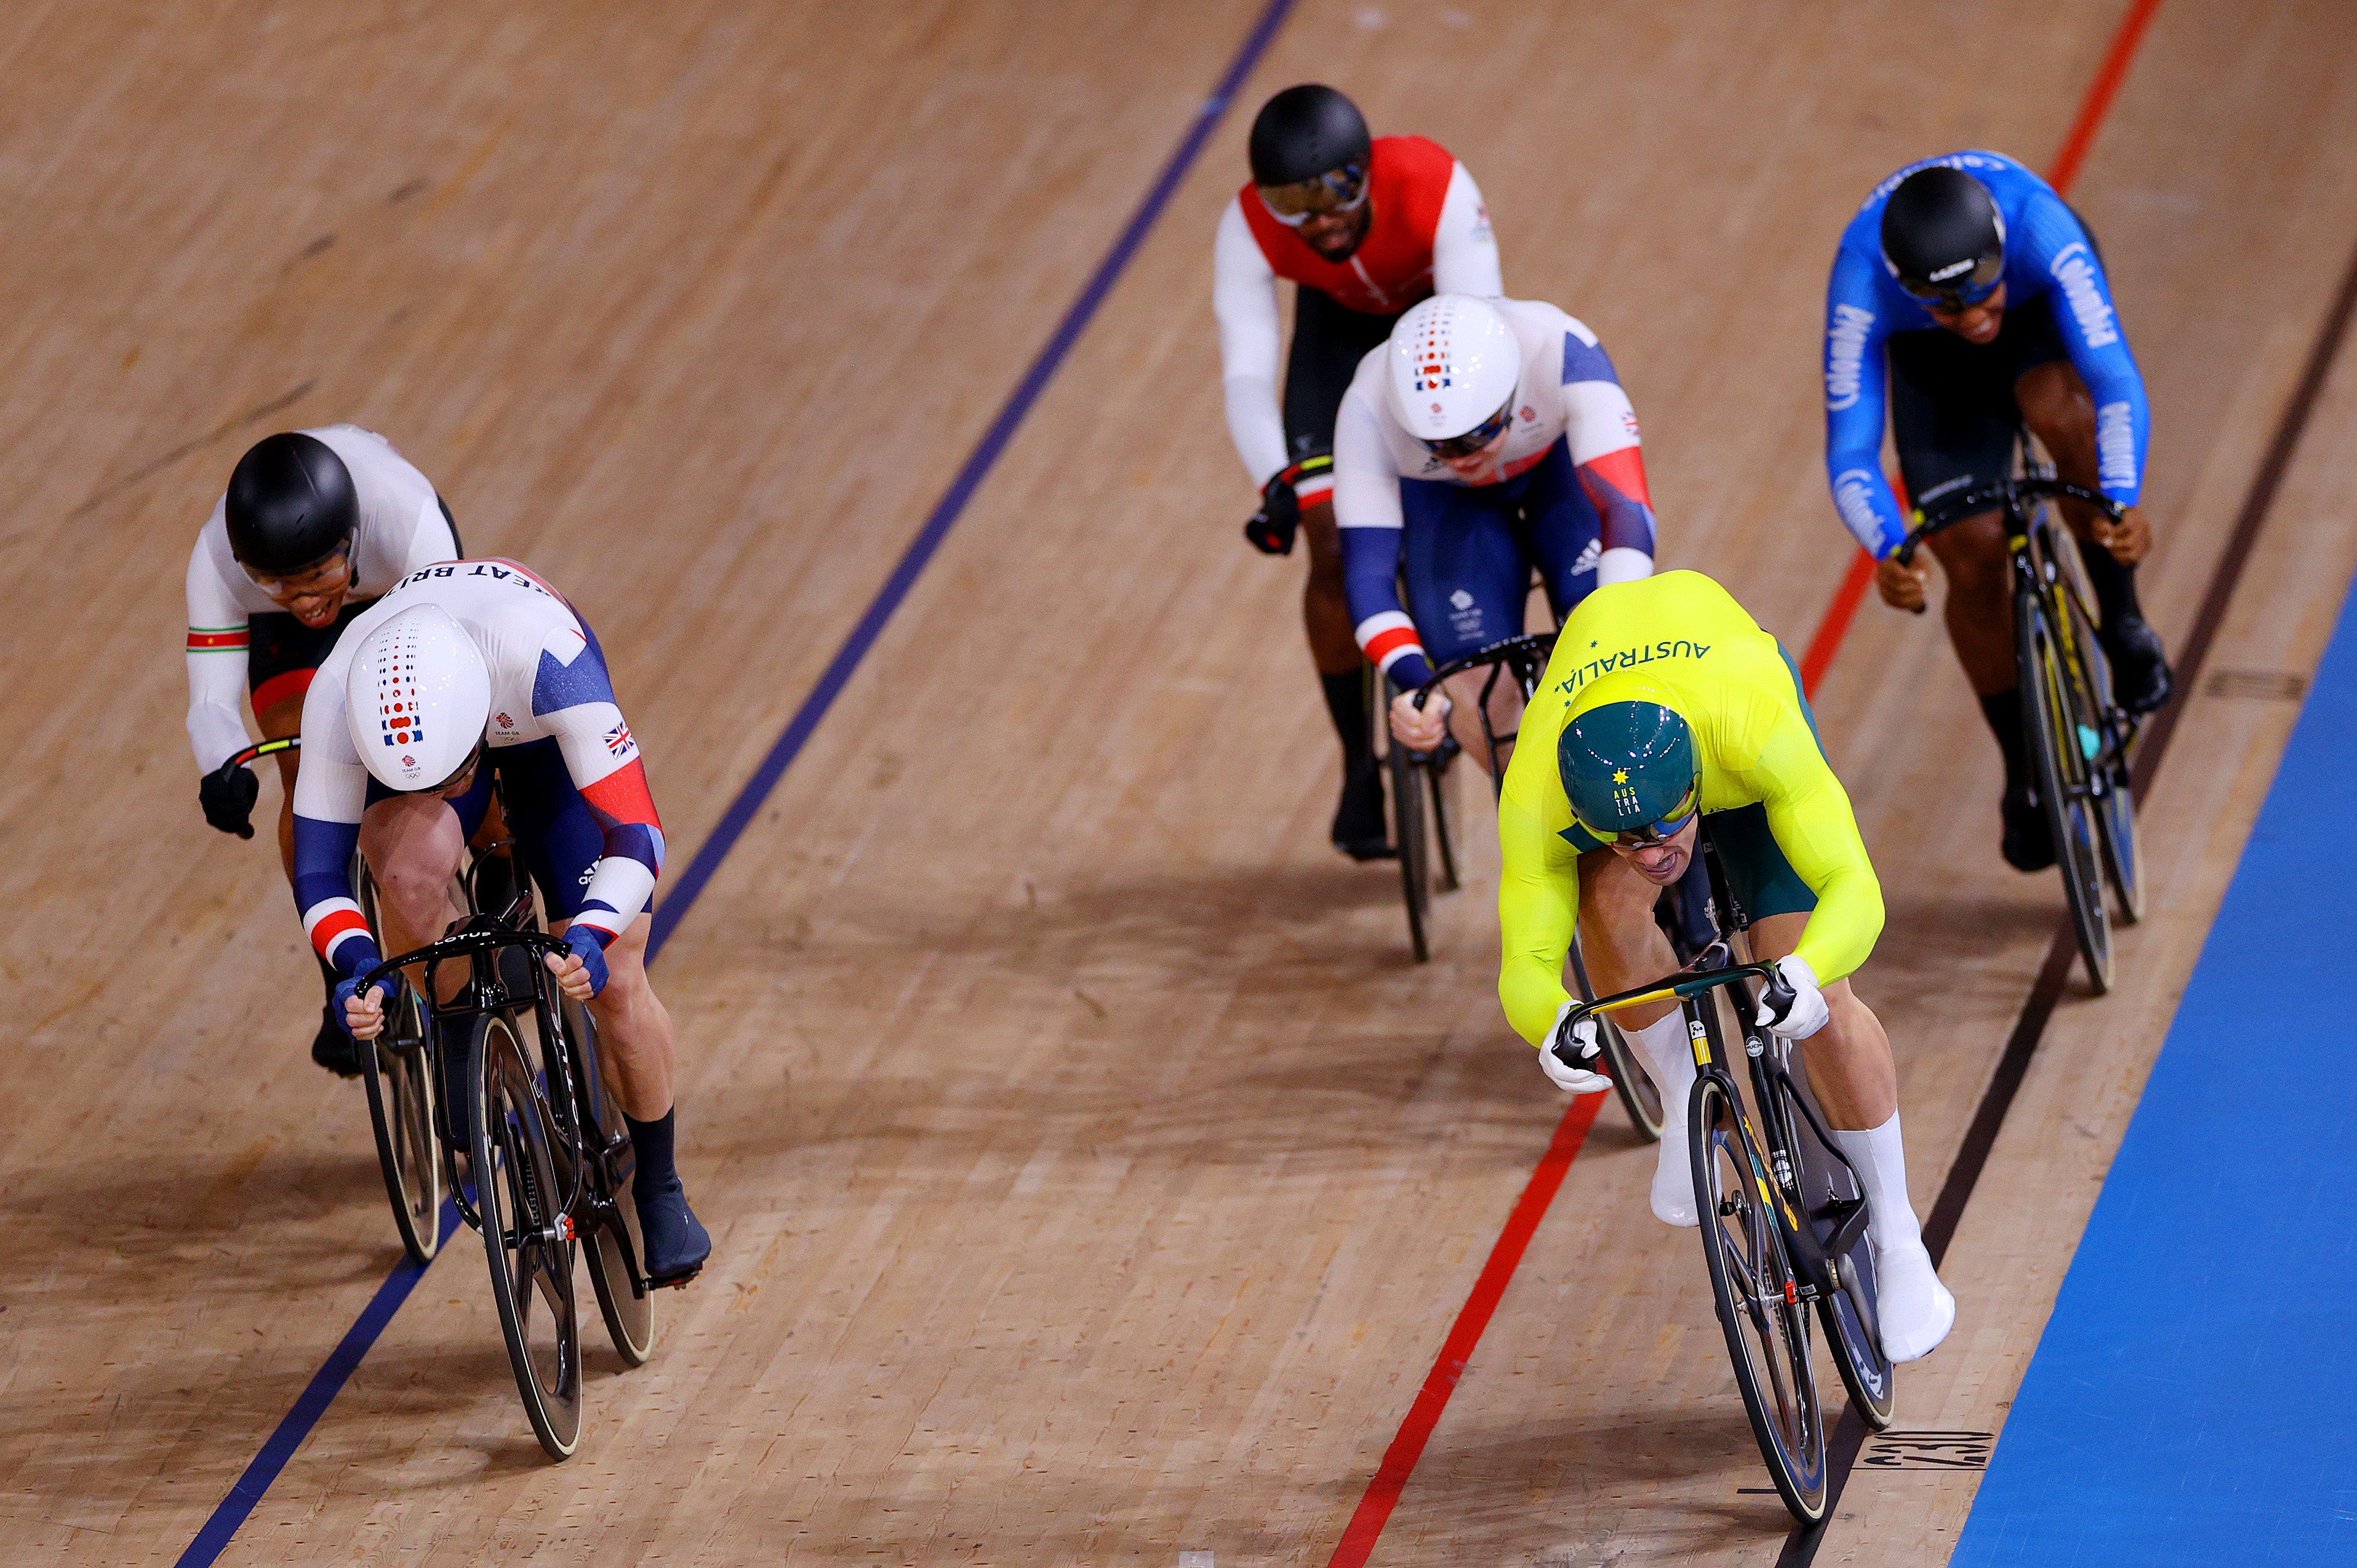 Jason Kenny of Team Great Britain and Matthew Glaetzer of Team Australia sprint during the Men's keirin semifinals of the Tokyo 2020 Olympic Games at Izu Velodrome on 8 August 2021 in Izu, Shizuoka, Japan